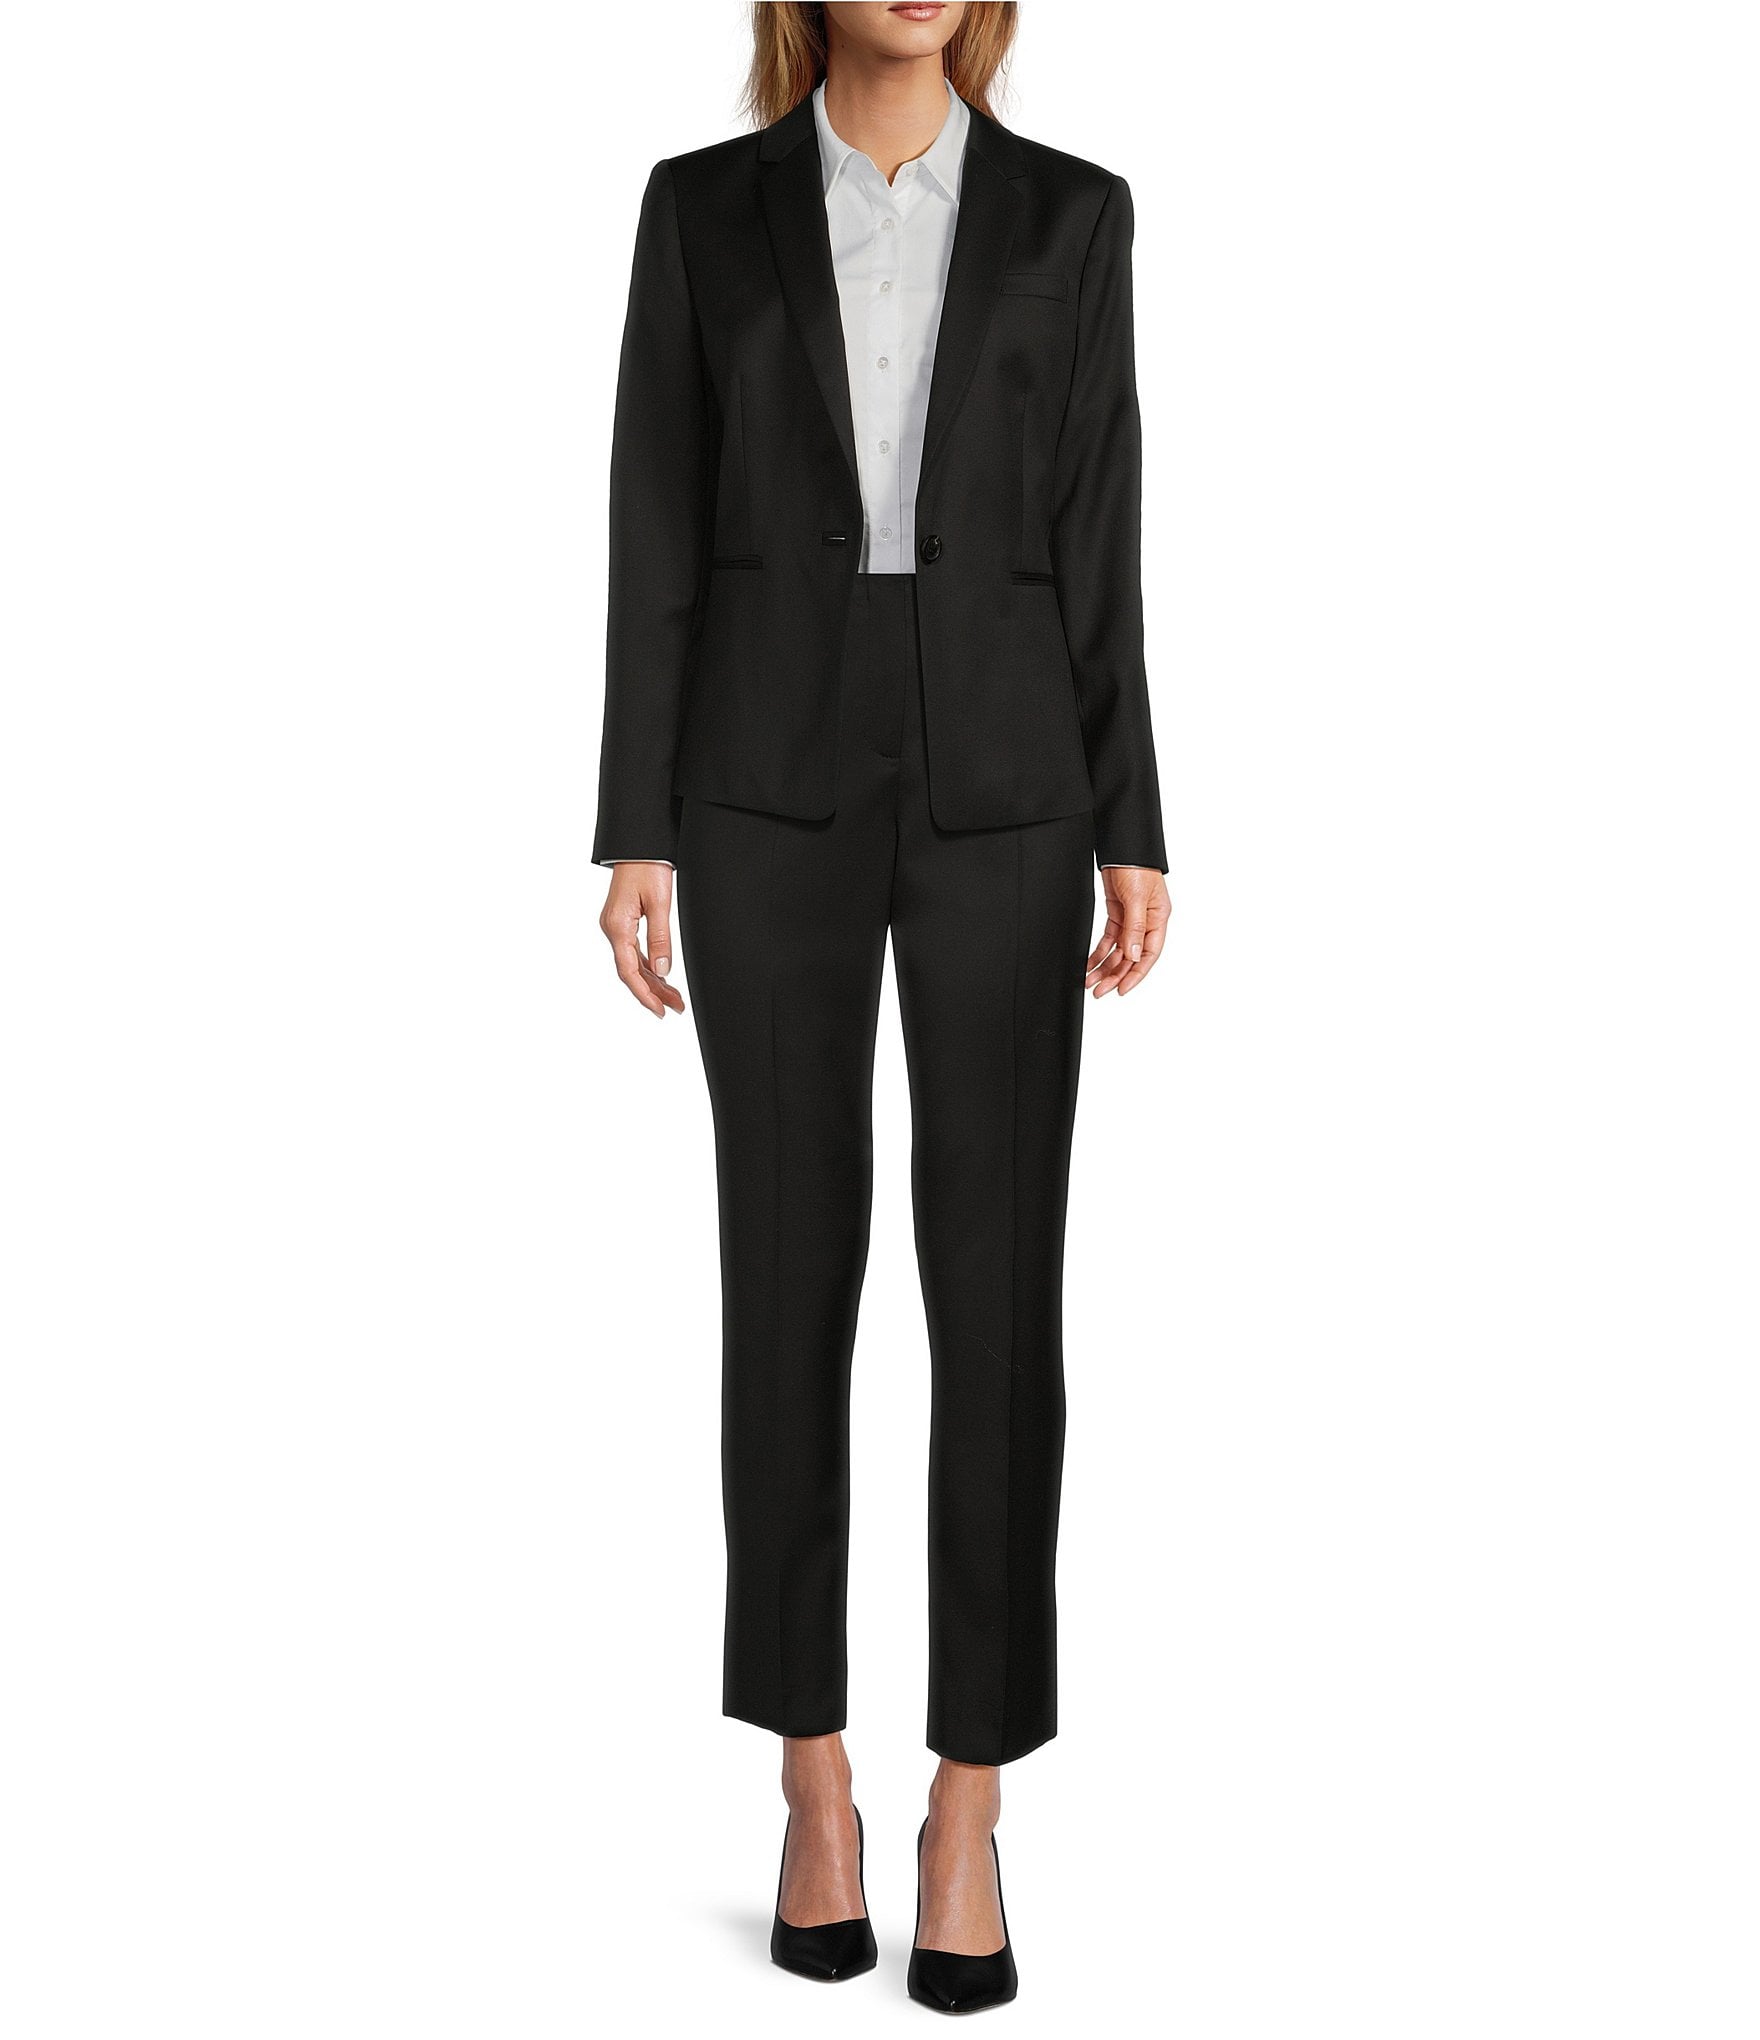 Black Dressy Suits For Women